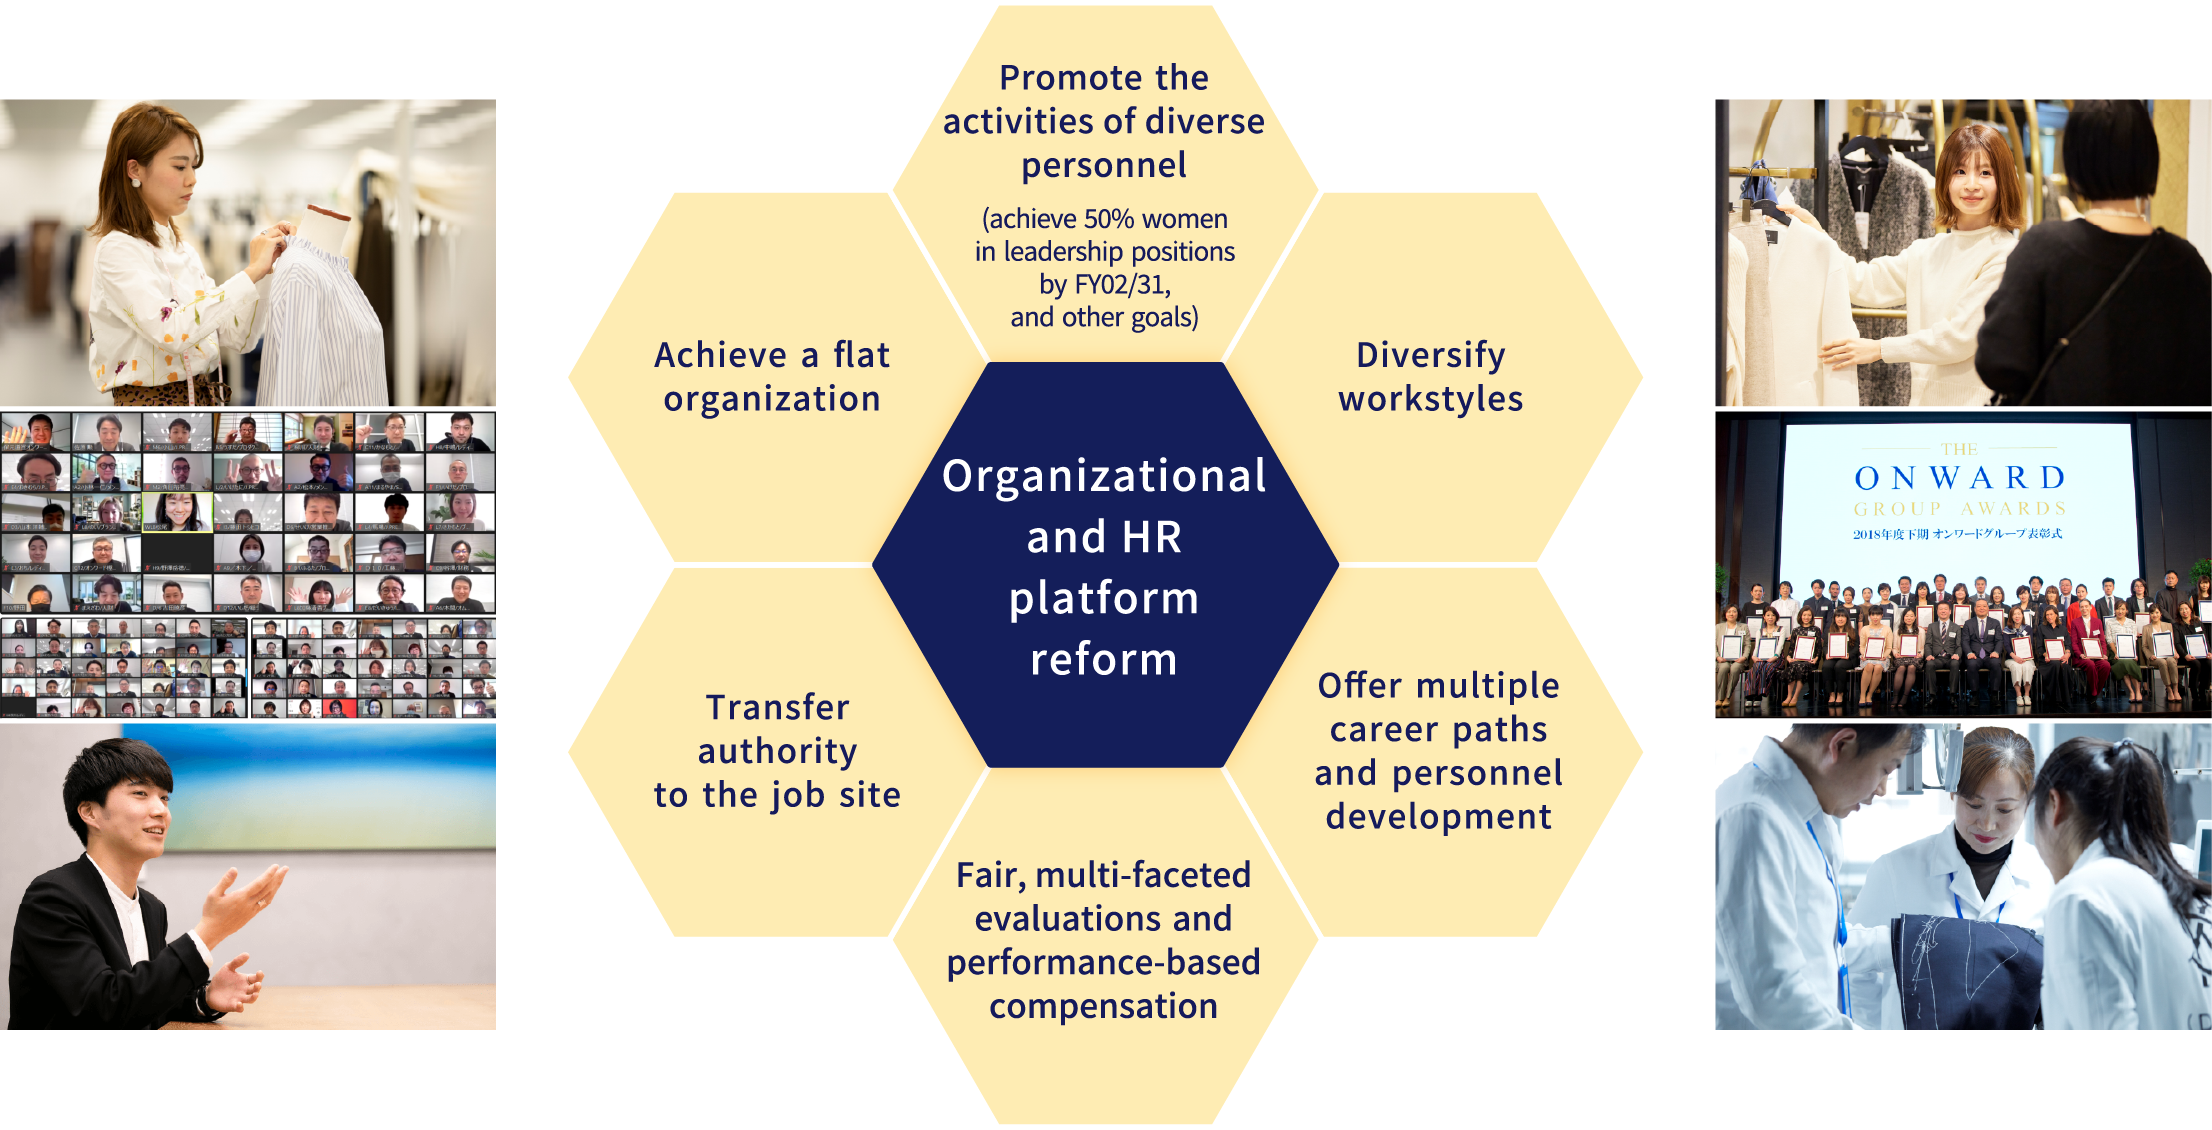 Organizational and HR platform reform Promote the activities of diverse personnel Diversify workstyles Offer multiple career paths and personnel development Fair, multi-faceted evaluations and performance-based compensation Transfer authority to the job site Achieve a flat organization